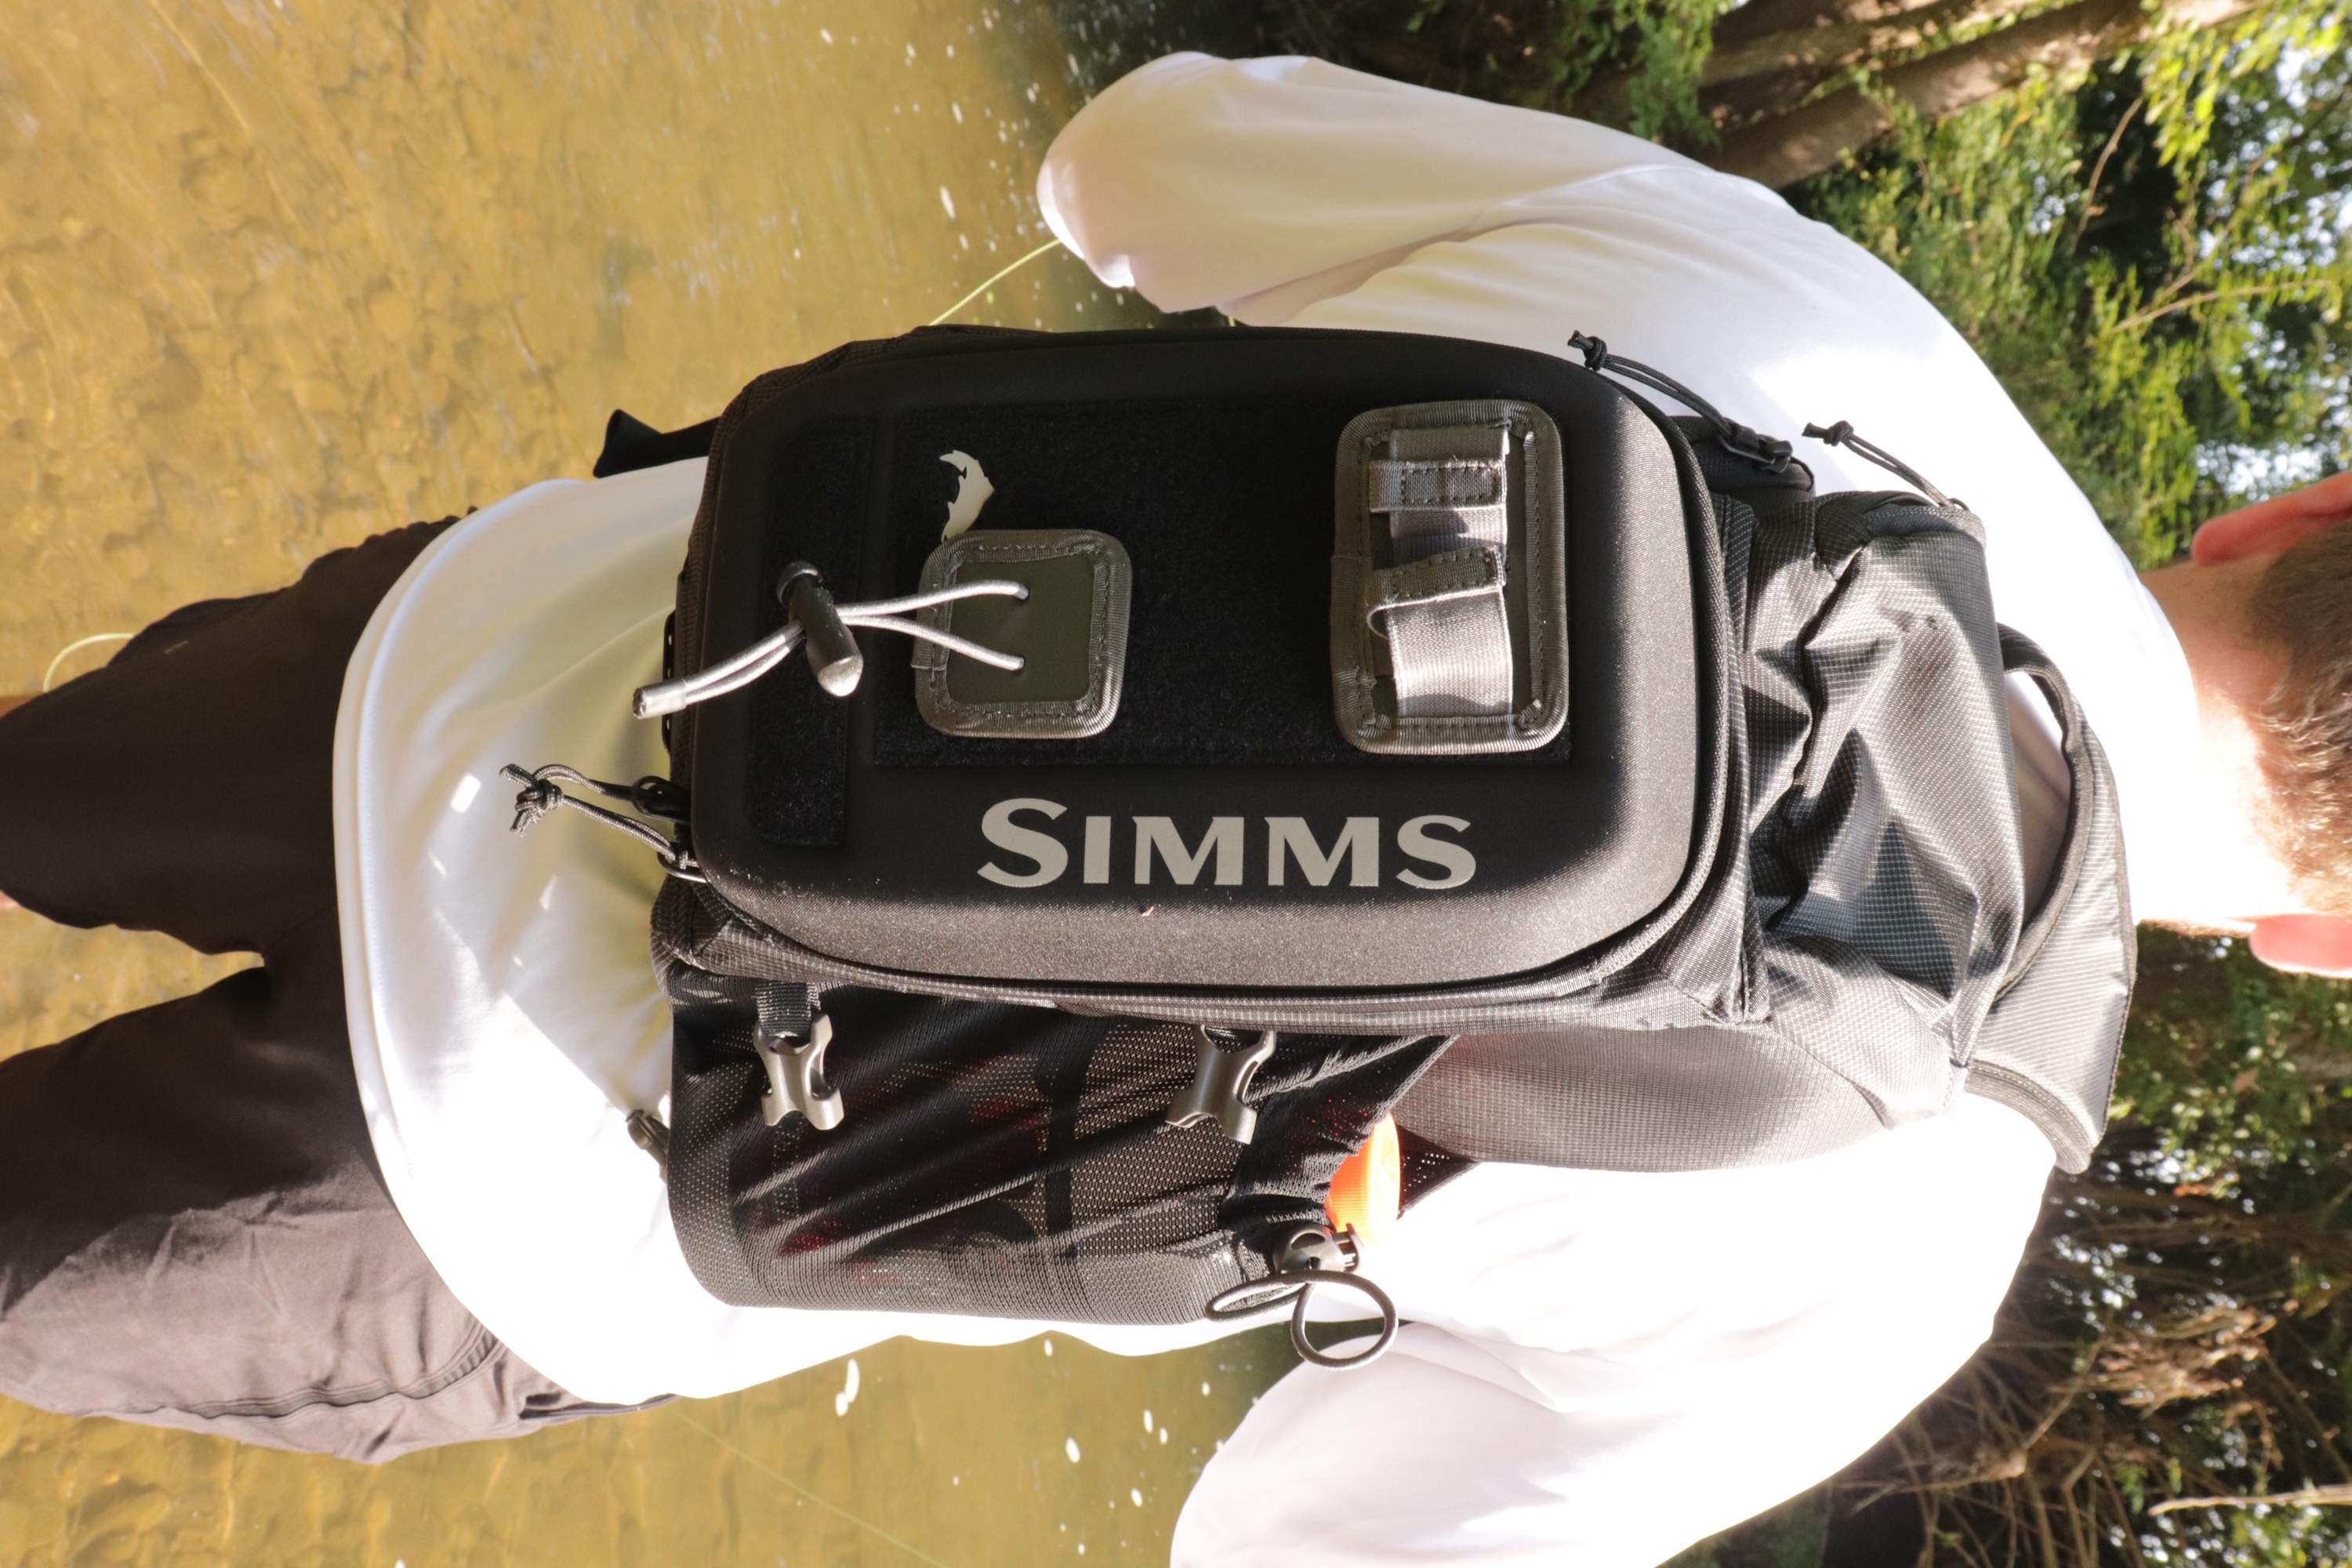 An Angler fishing while whereing the Simms Freestone Sling Pack